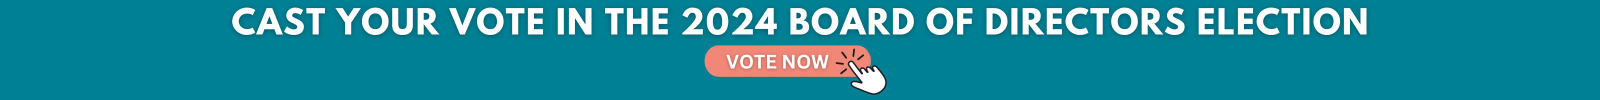 Cast Your Vote in the 2024 Board of Directors Election